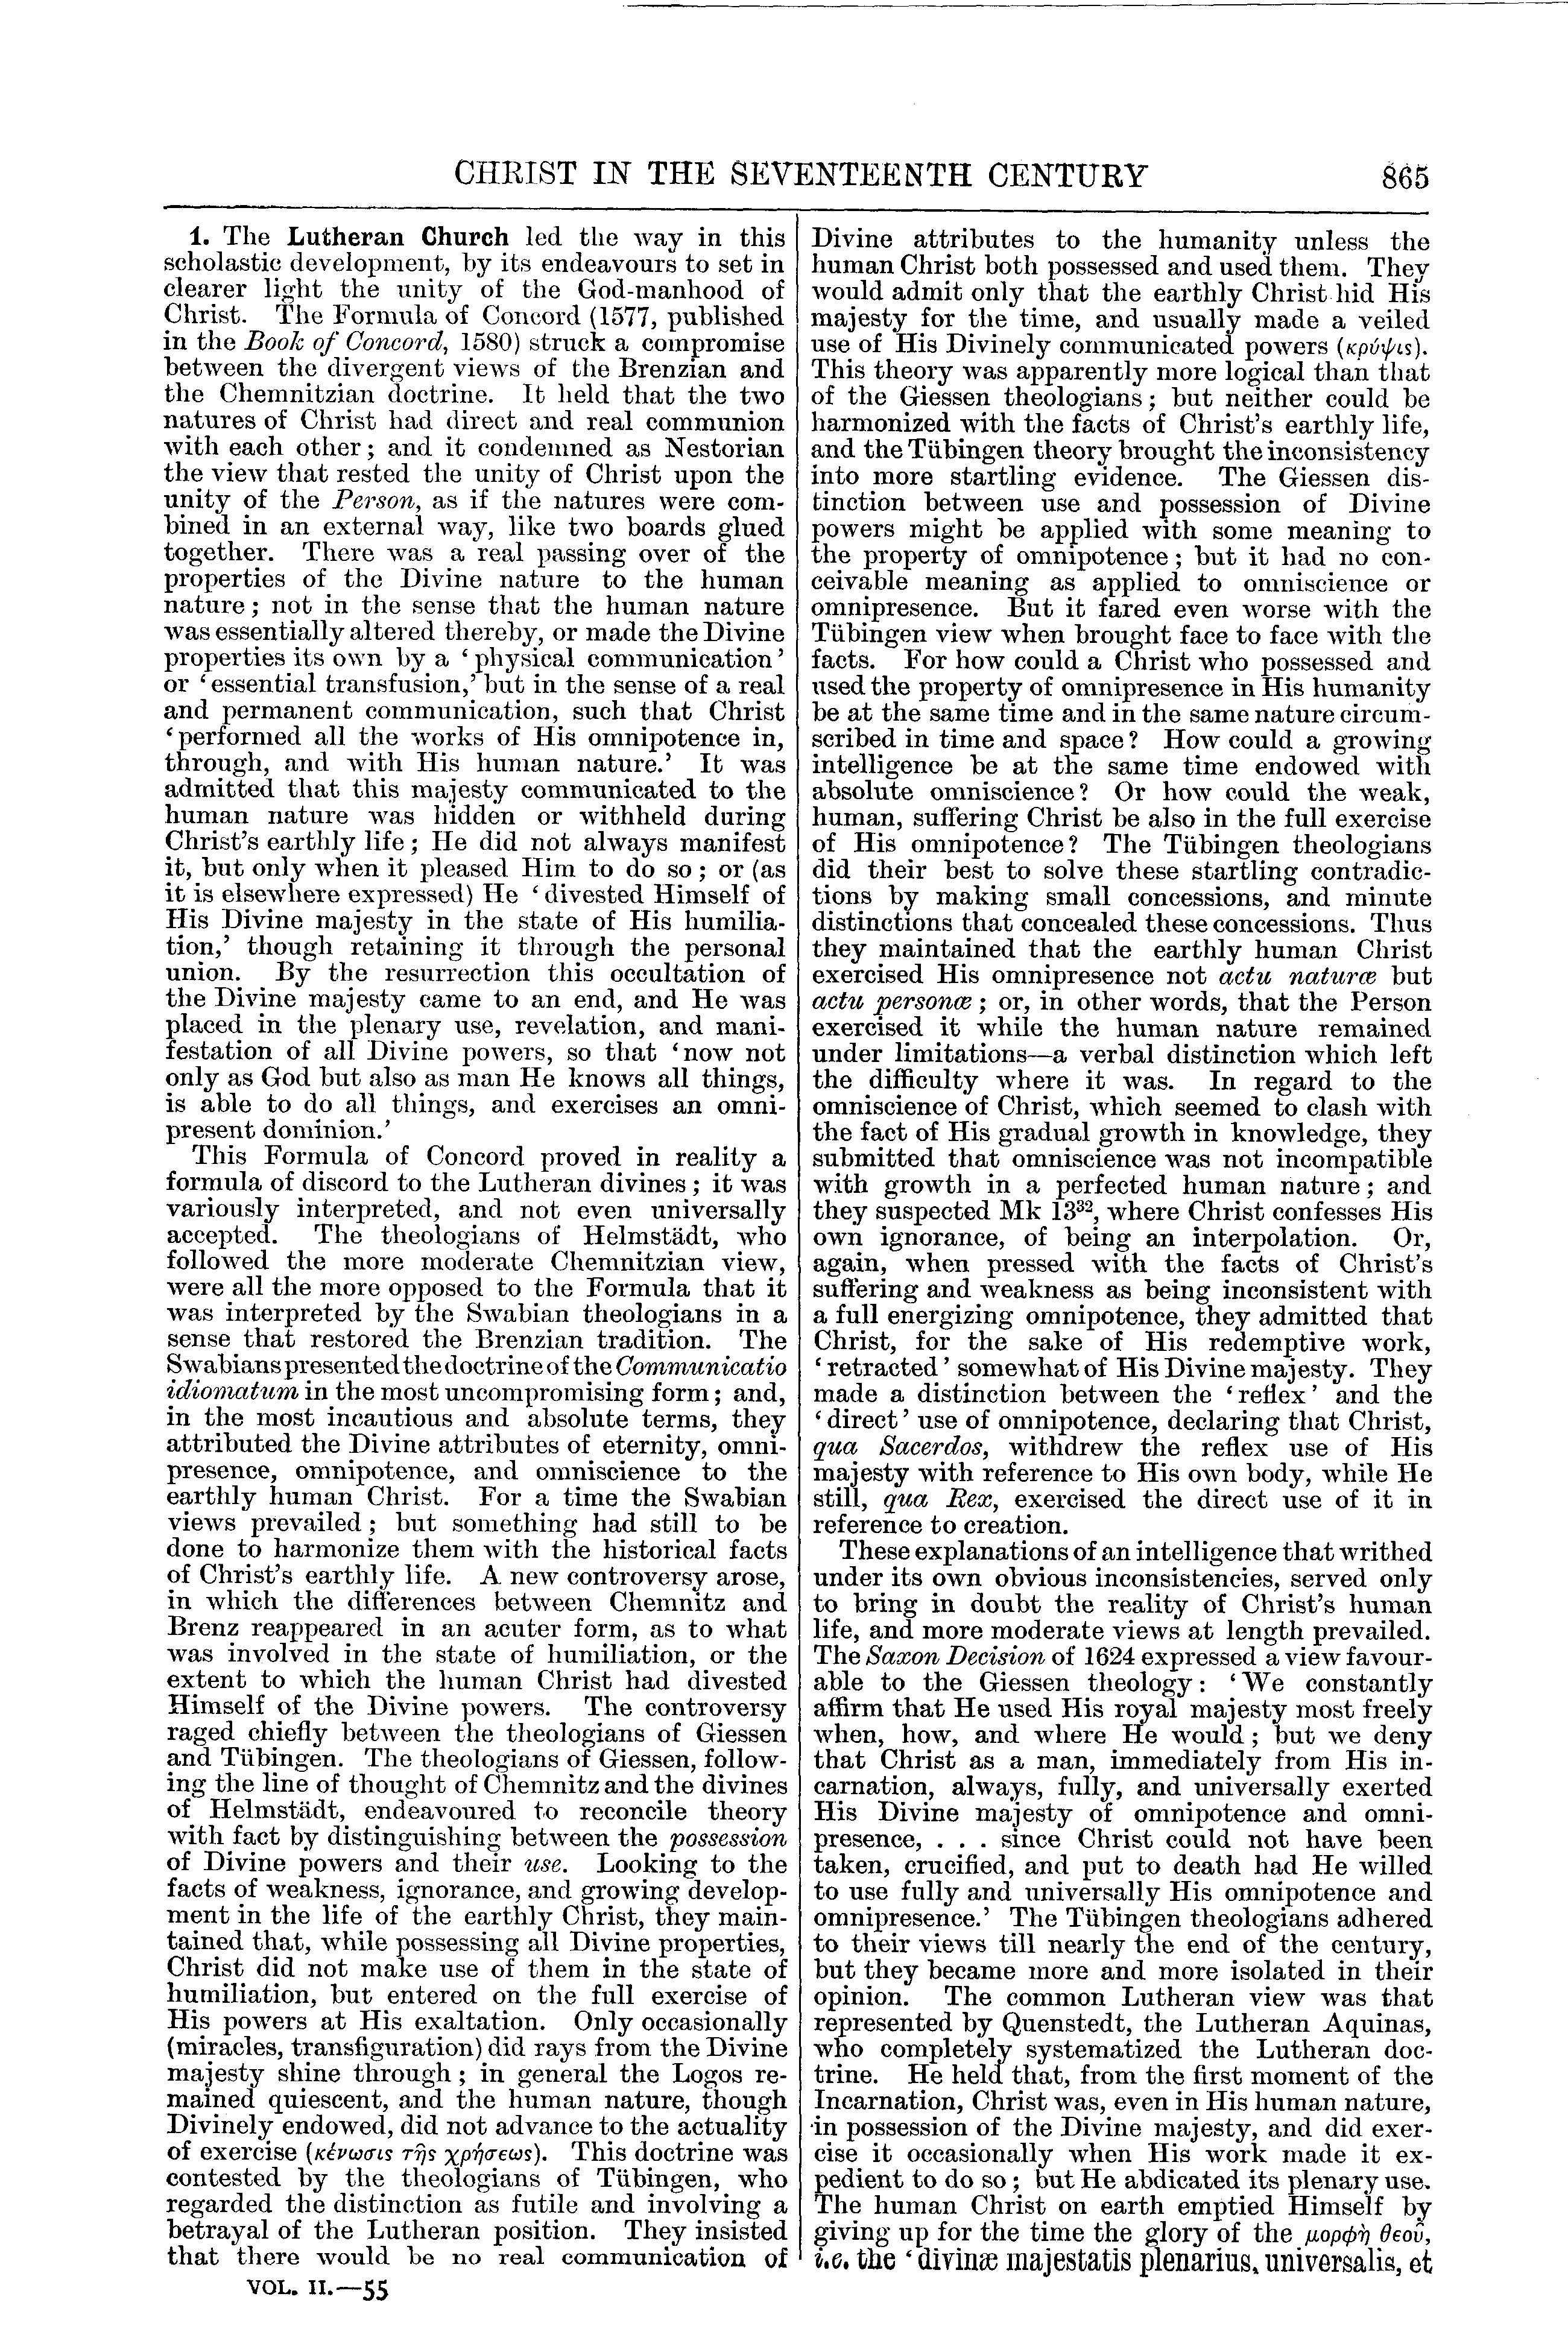 Image of page 865